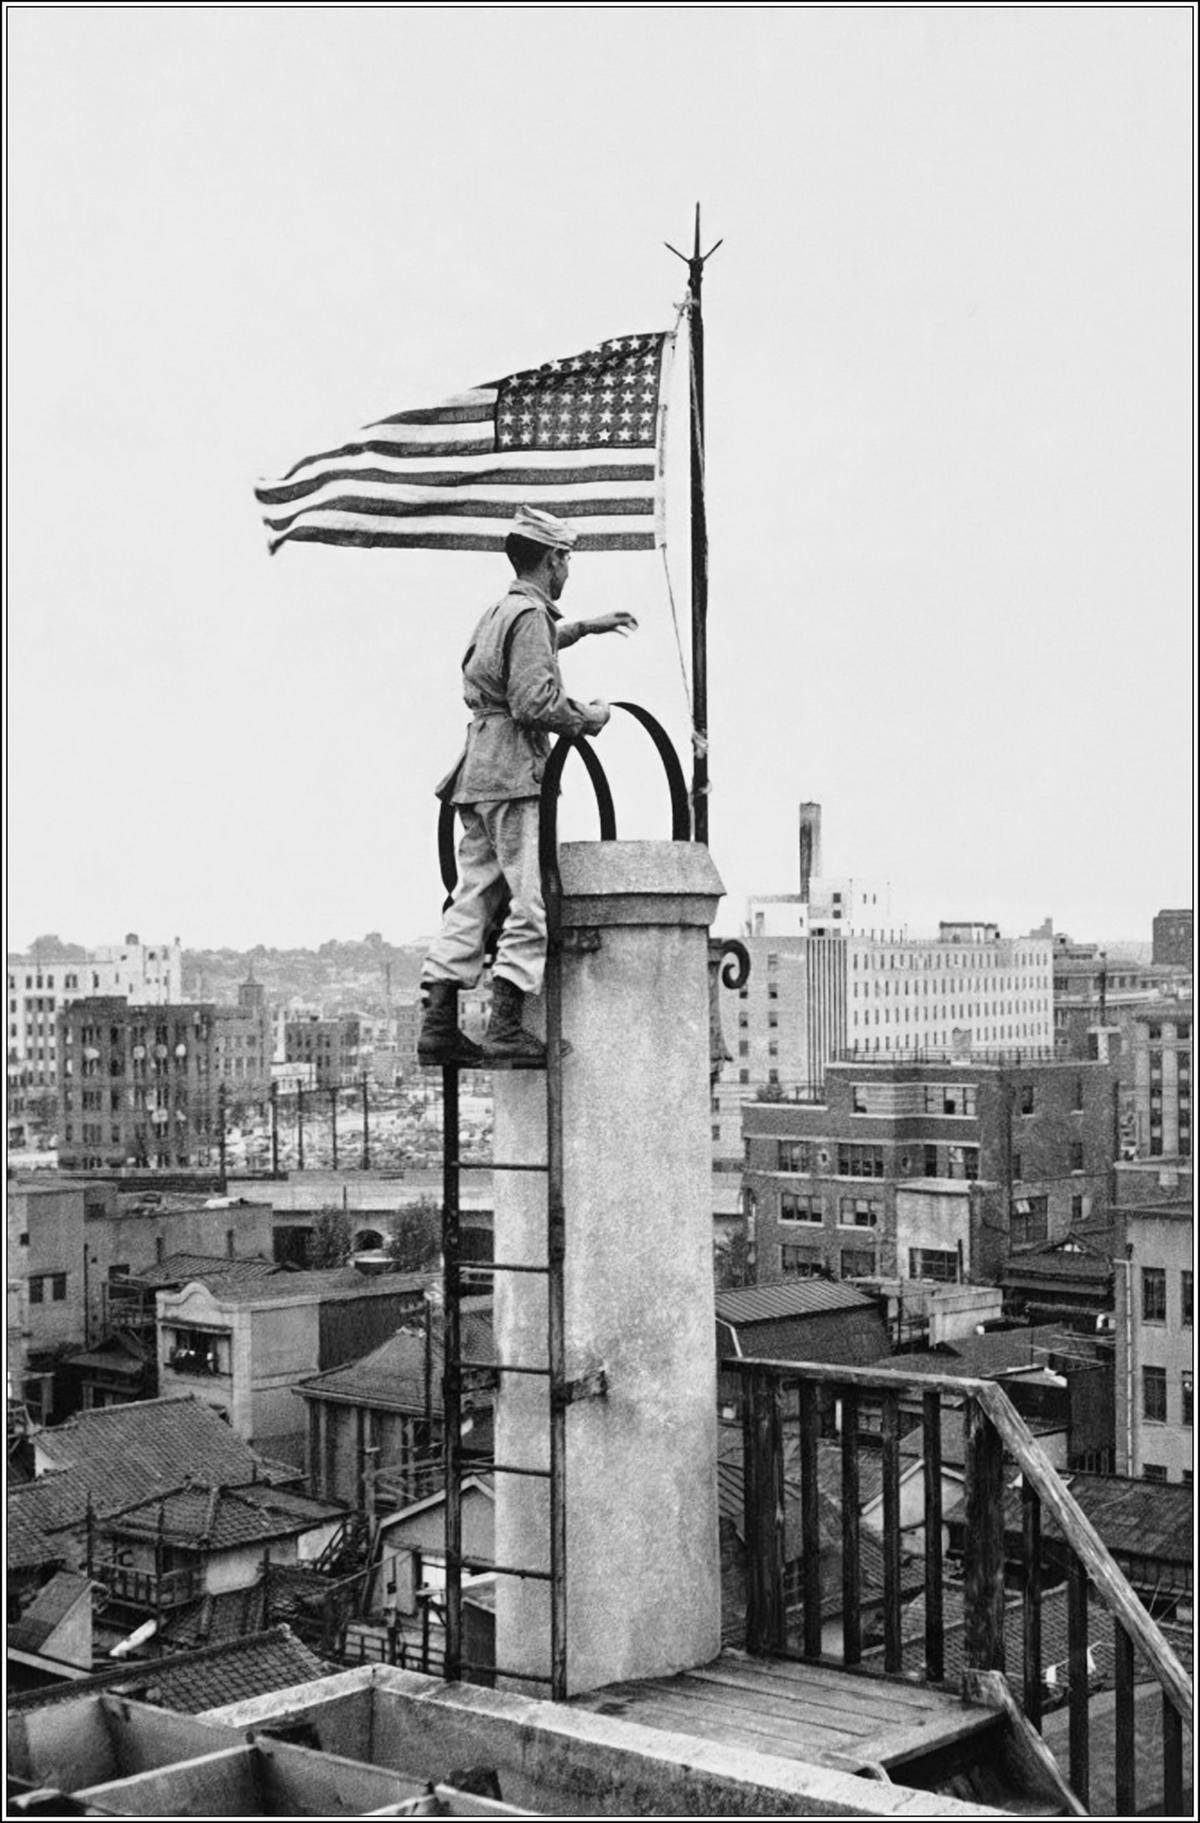 The Angels’ Lt. Bernard J. "Bud" Stapleton raises the American flag atop the Nippon News building in Tokyo on Sept. 5, 1945. (<span style="font-weight: 400;">U.S. Army Archives)</span>